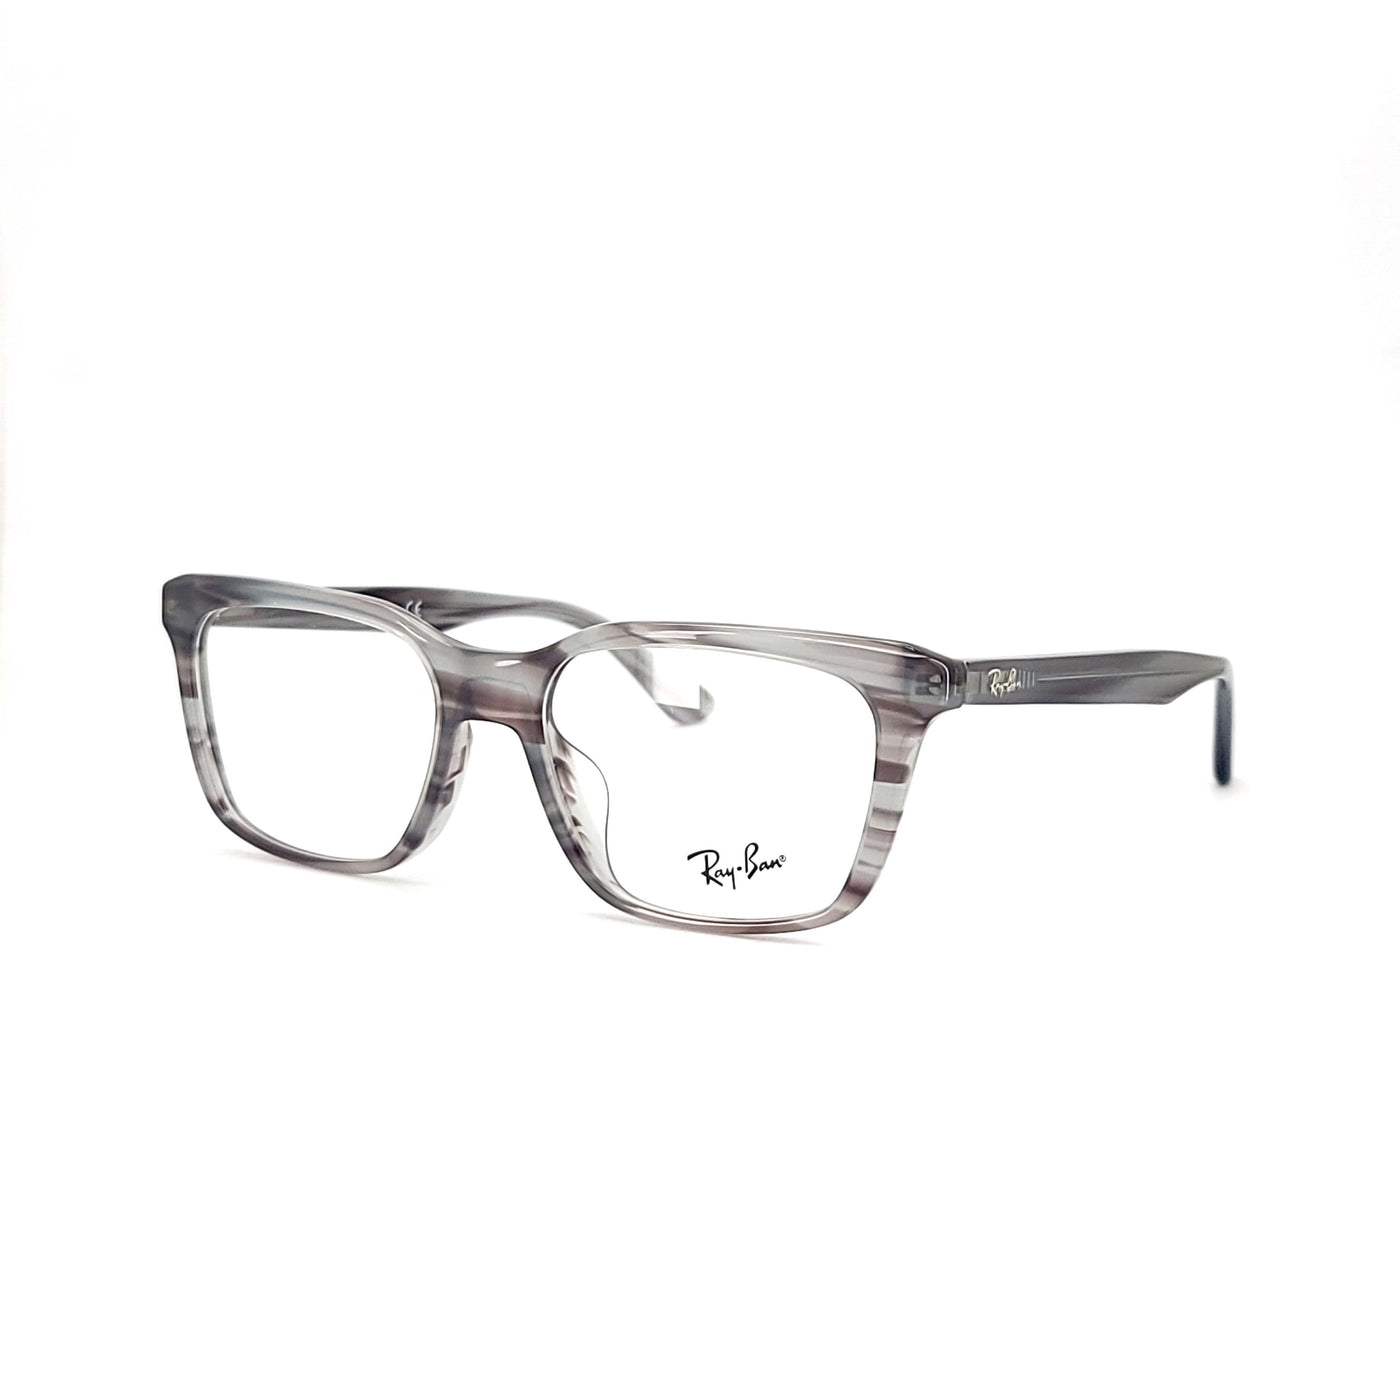 Ray-Ban Highstreet RB5391F/8055_53 | Eyeglasses - Vision Express Optical Philippines